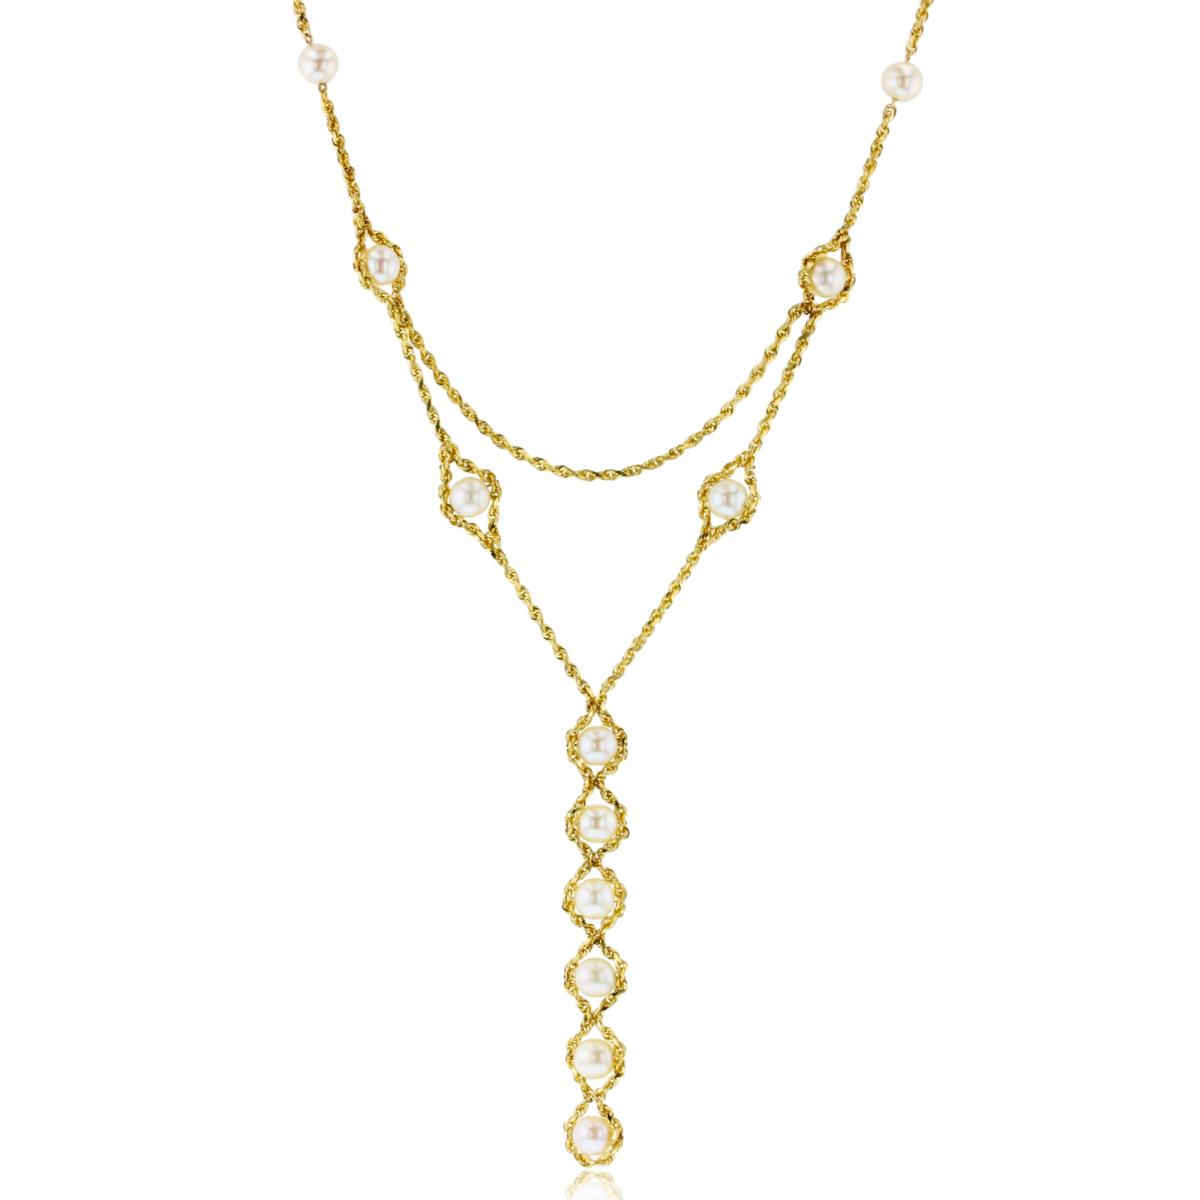 14K Yellow Gold 6mm White Pearl Vertical Flexi Dangling Wrapped with Chain 18"Necklace